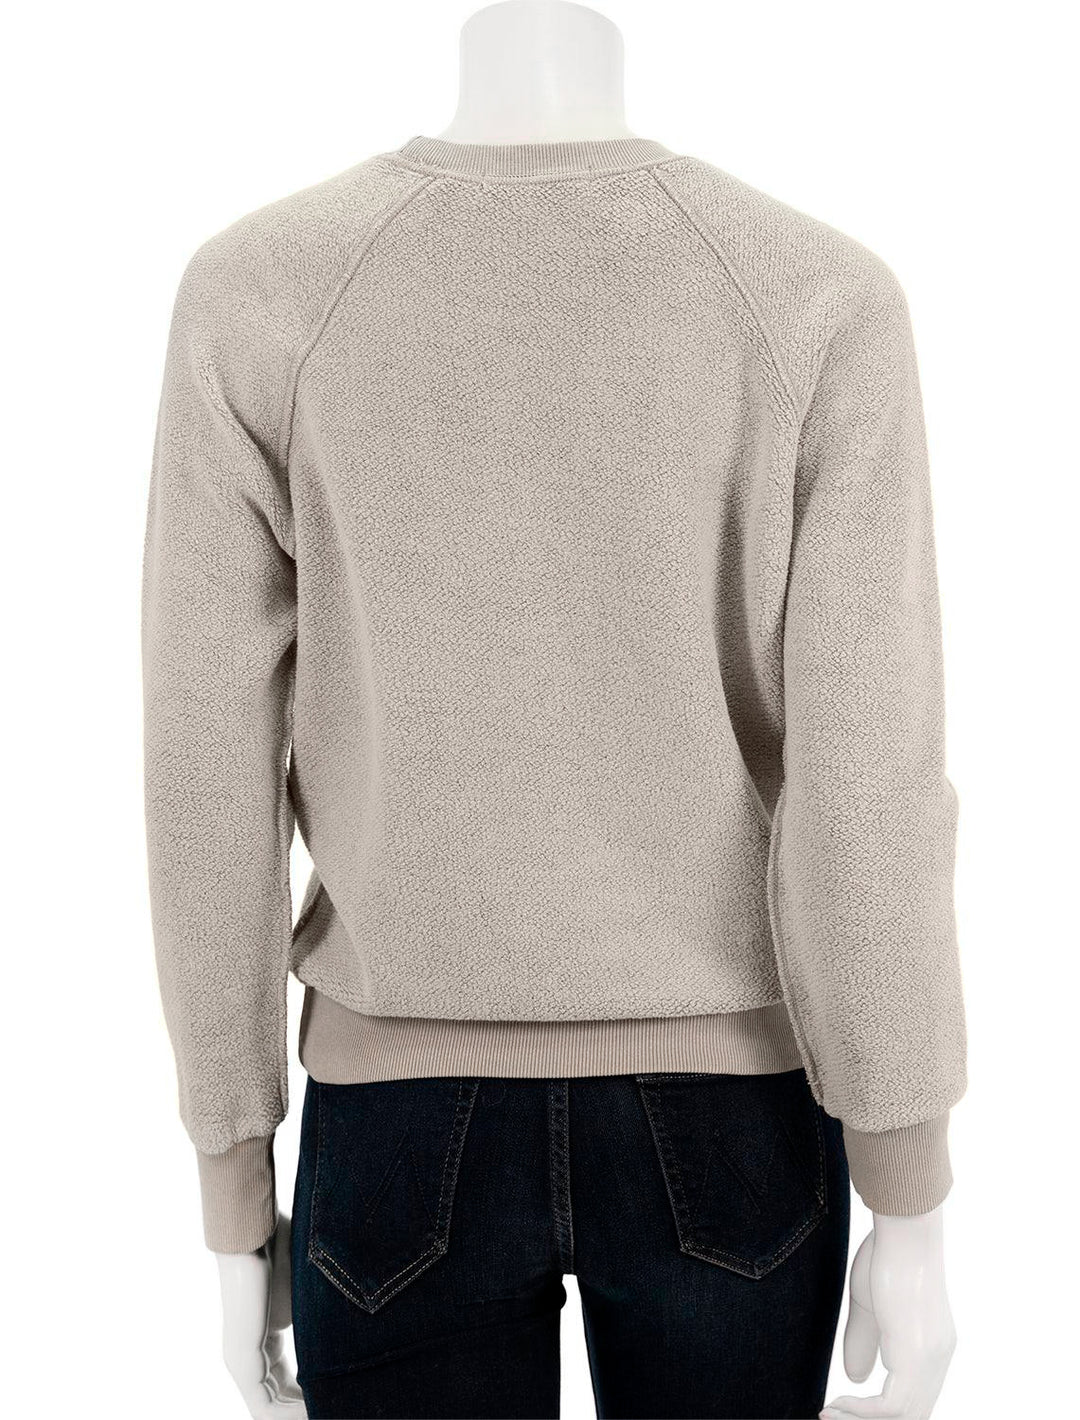 Back view of Perfectwhitetee's ziggy inside out sweatshirt in pashmina.